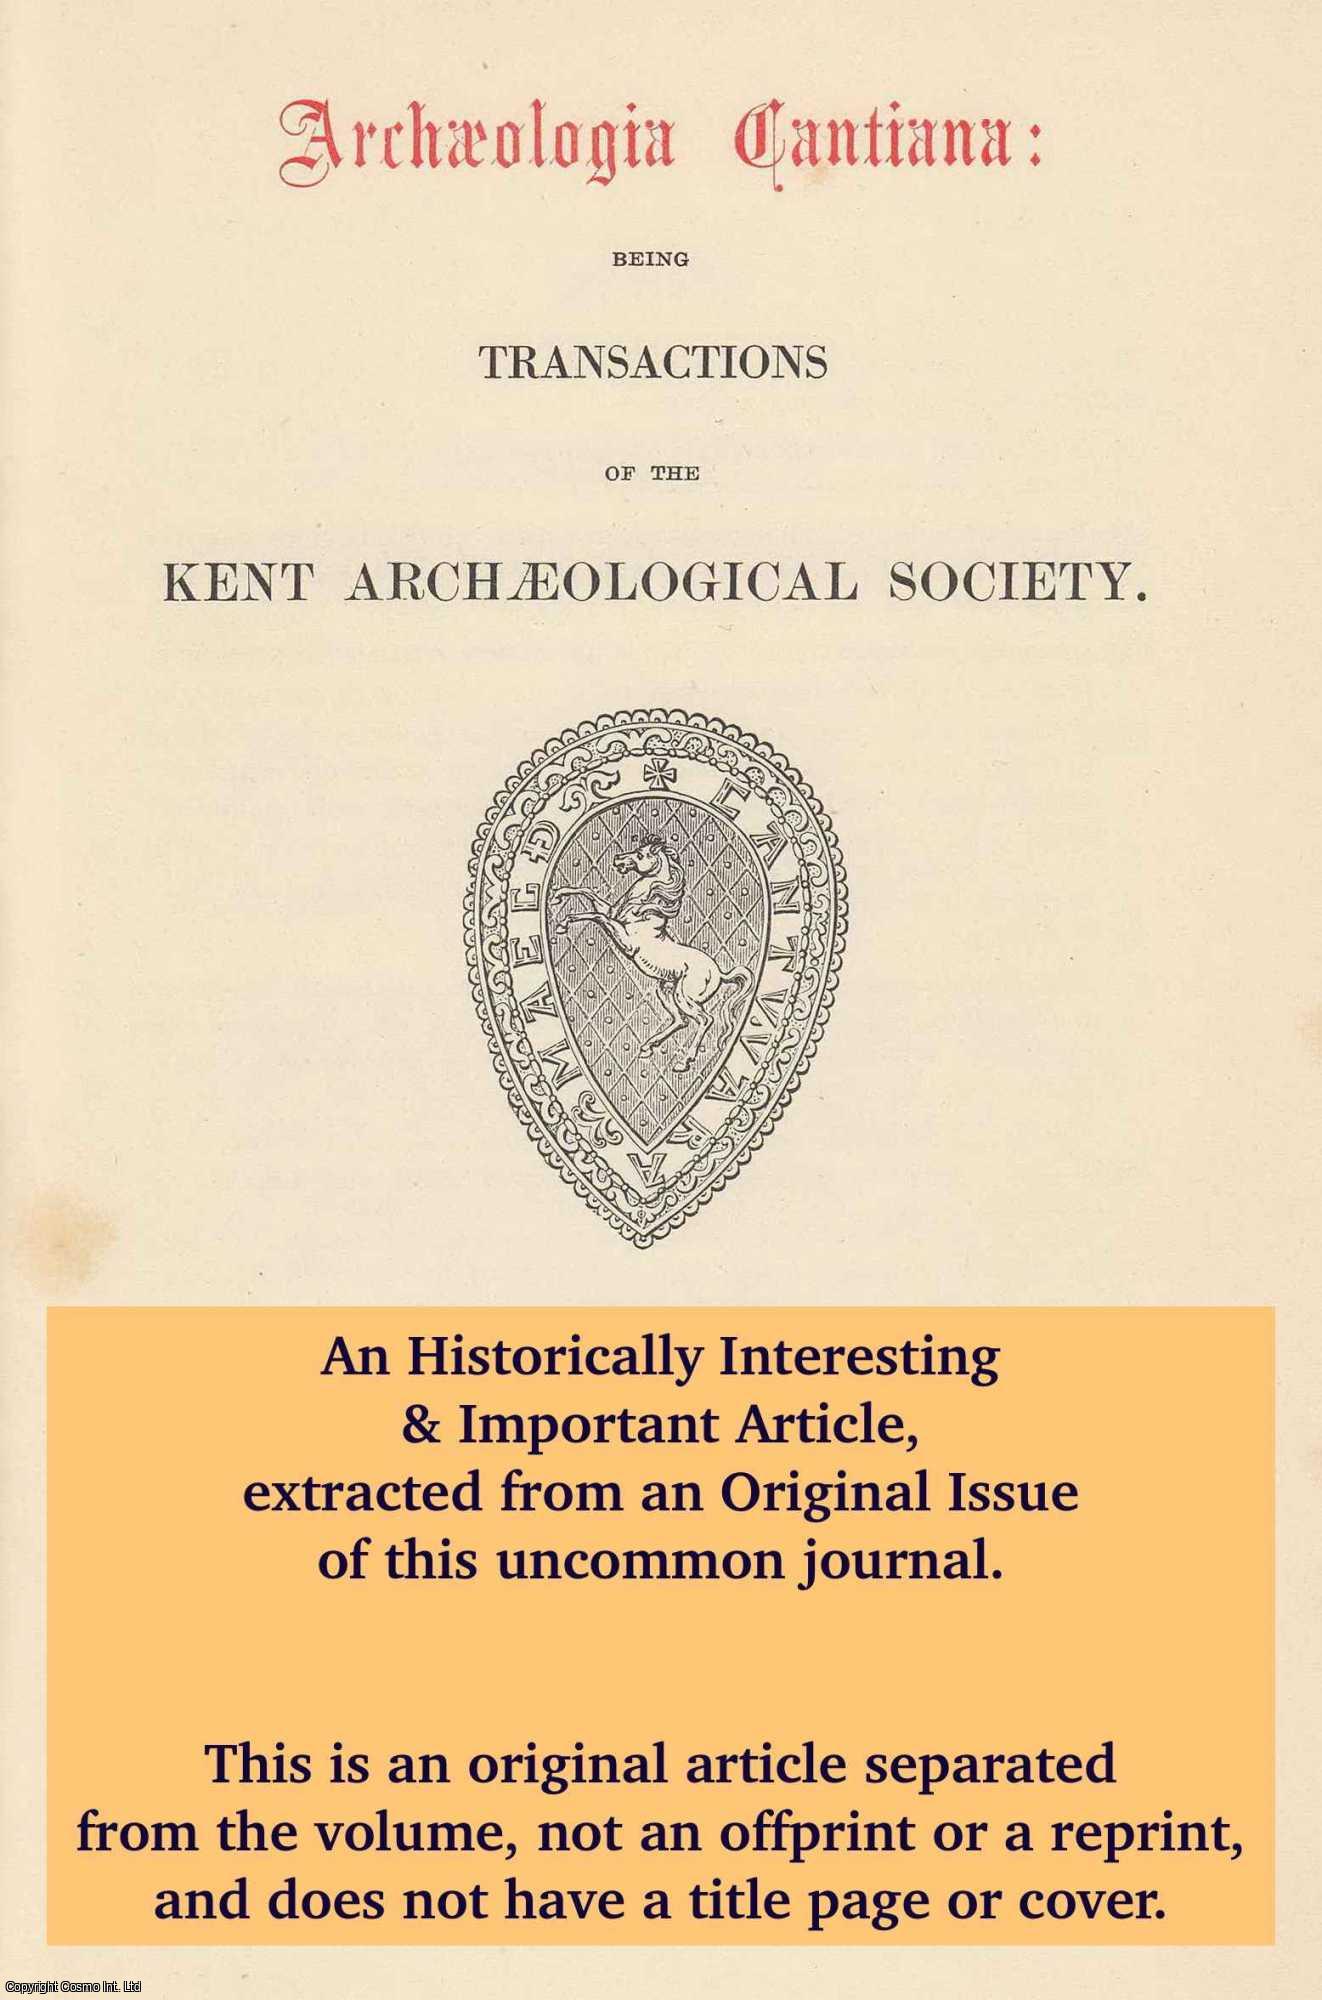 Not Stated - Obituary: Peter James Tester. An original article from The Archaeologia Cantiana: Transactions of The Kent Archaeological Society, 1994.